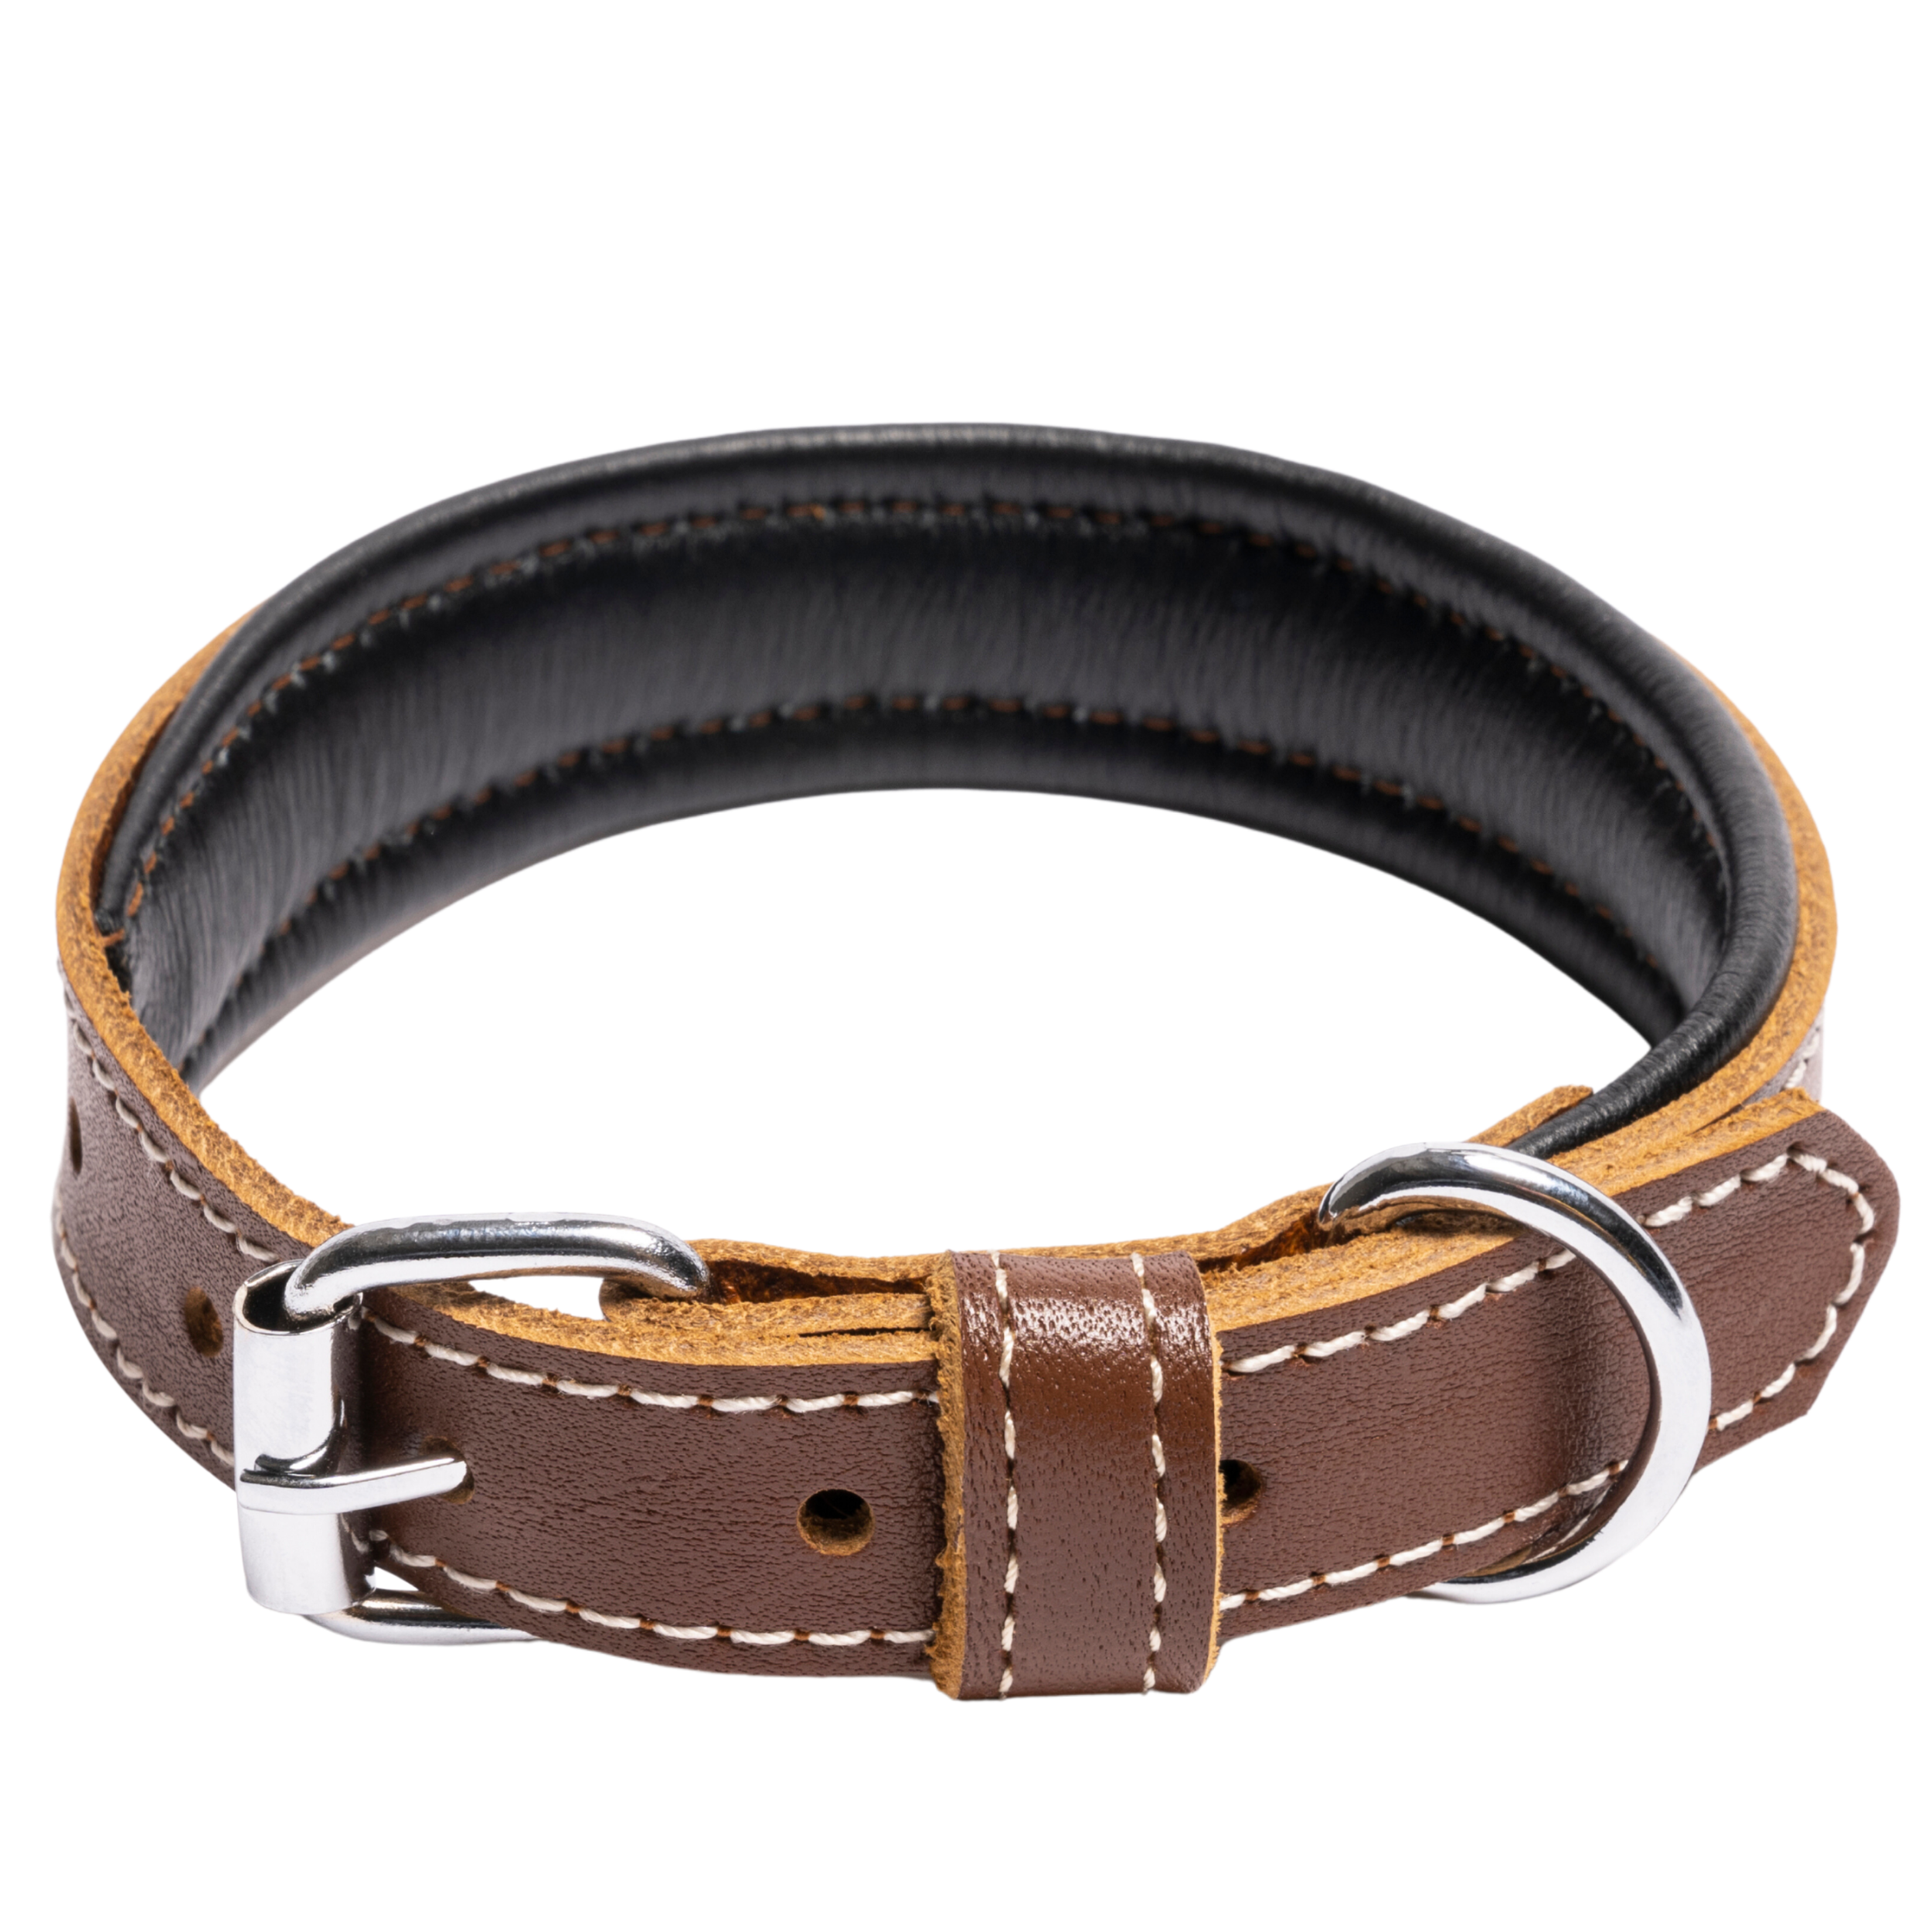 Leather Dog Collar Small Dogs, Large Dog Leather Collar